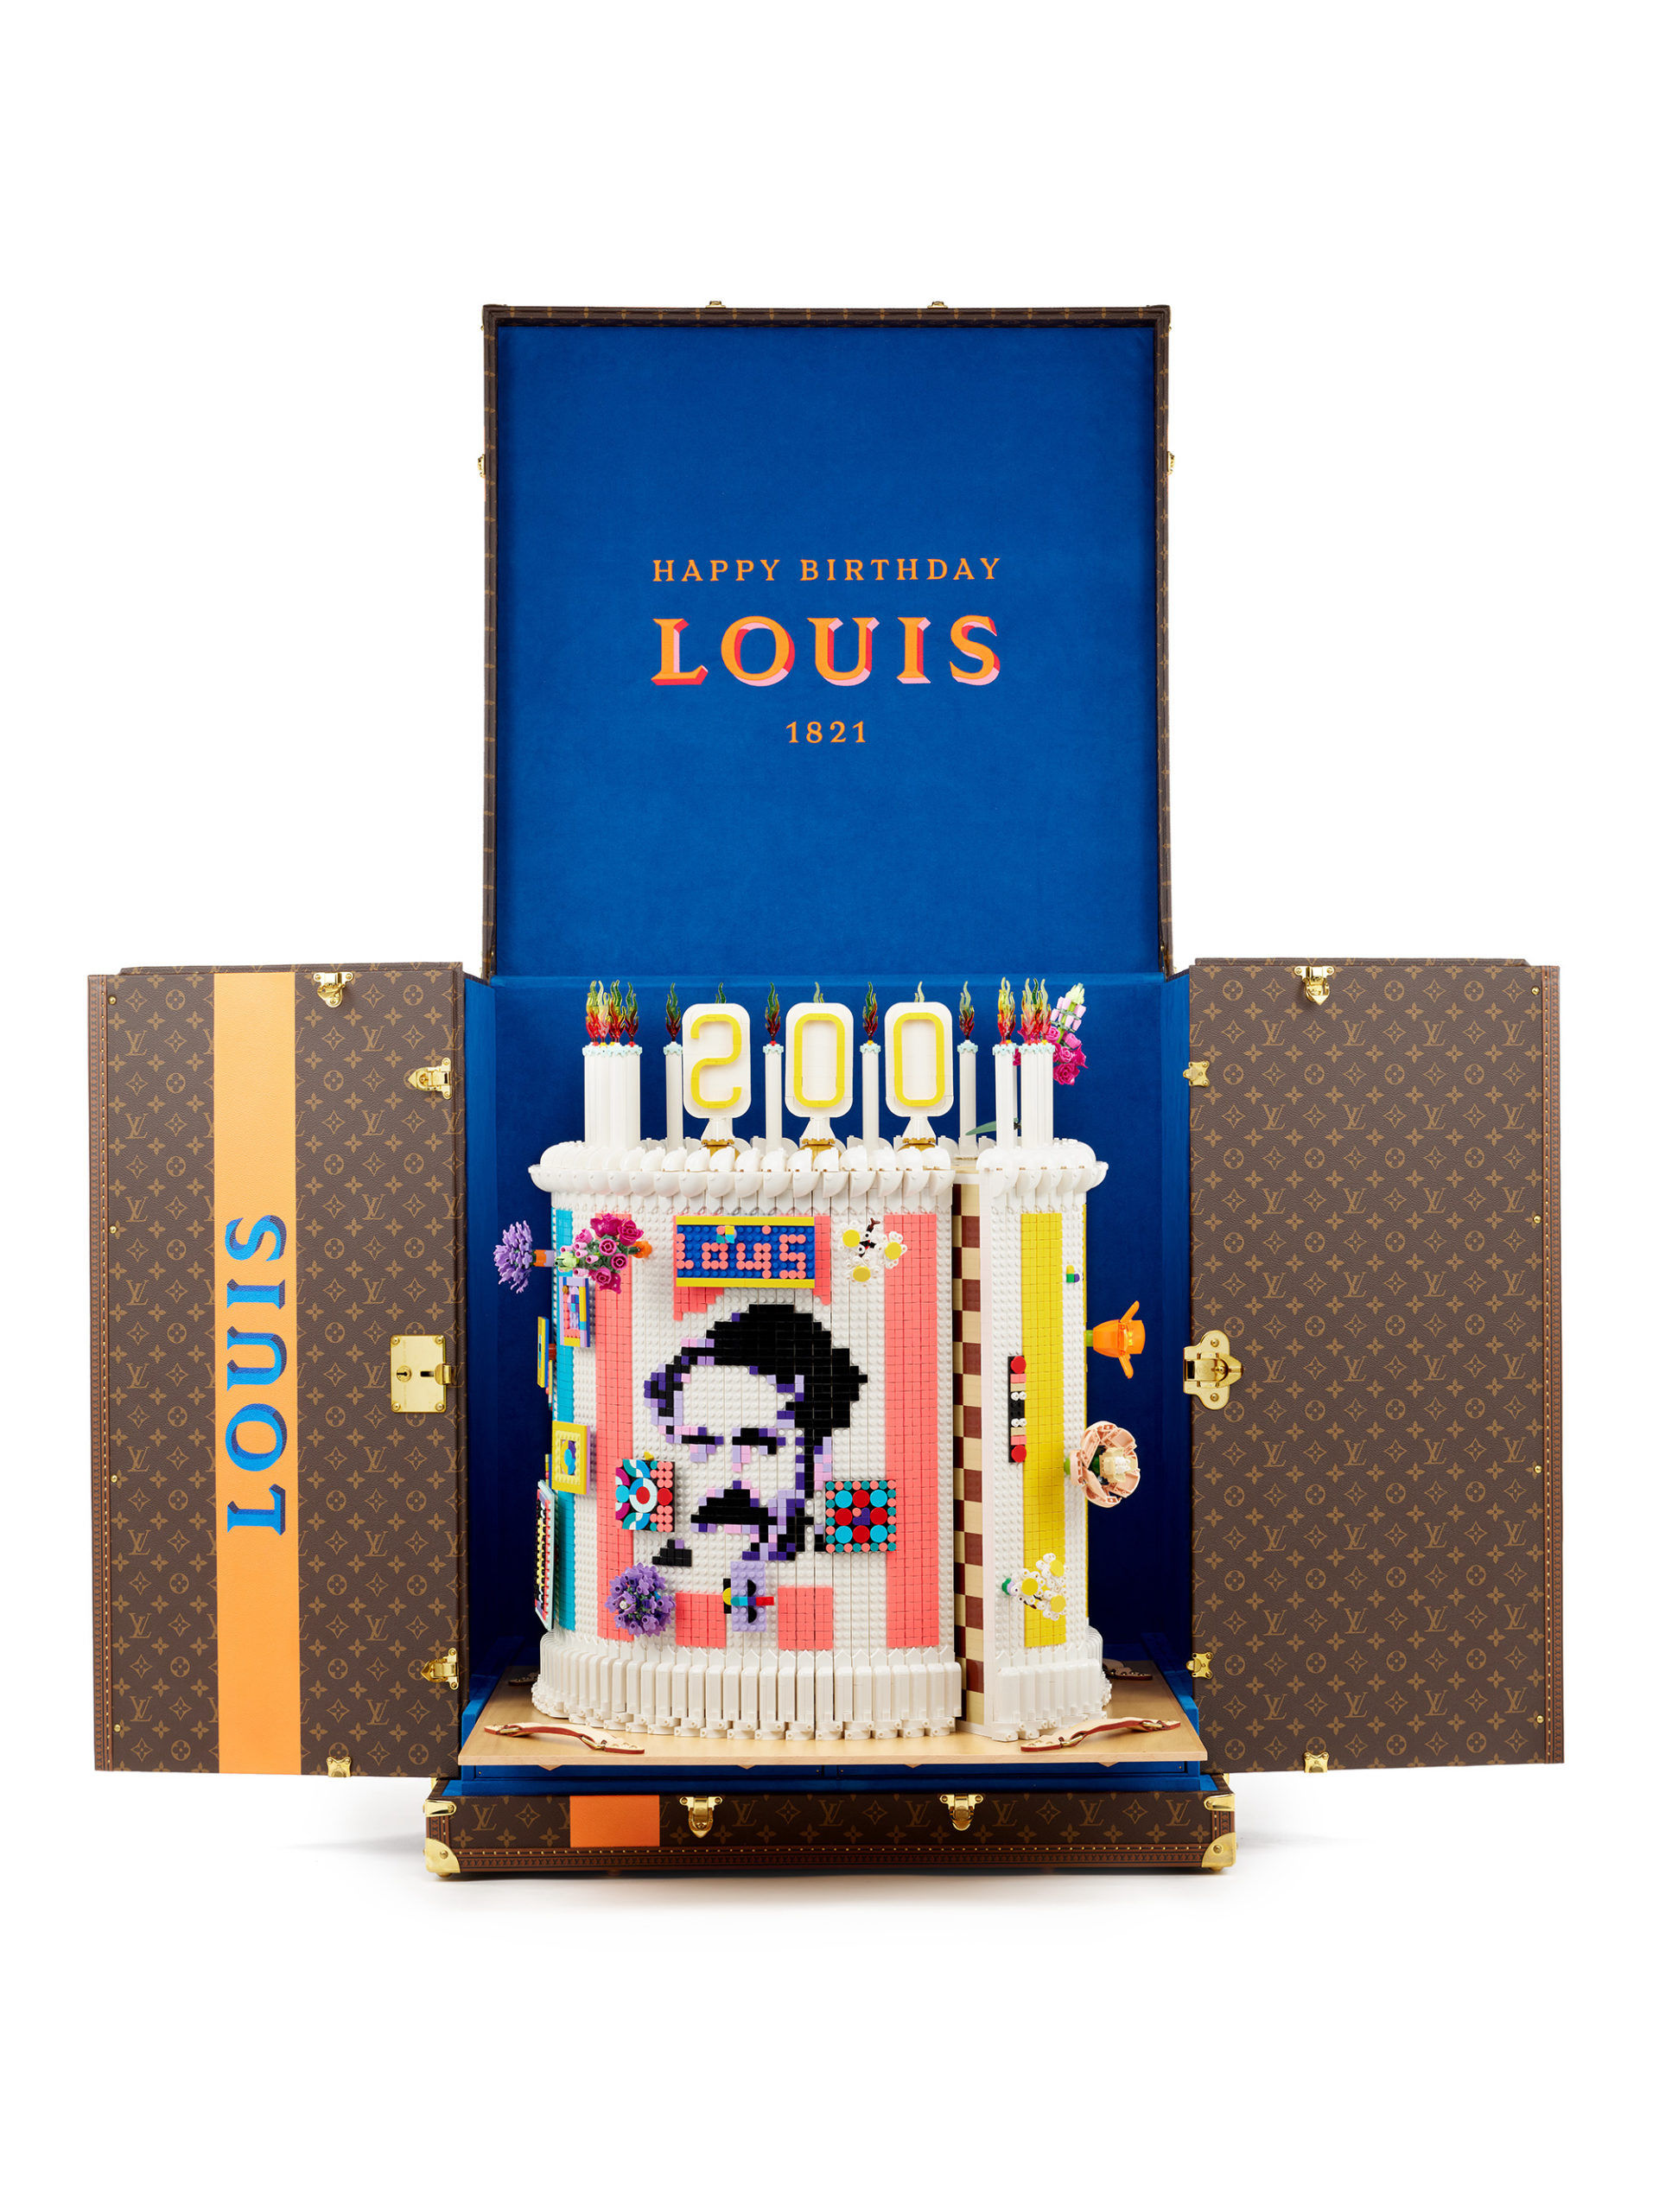 LV 200 Trunks, 200 Visionaries: The Exhibition